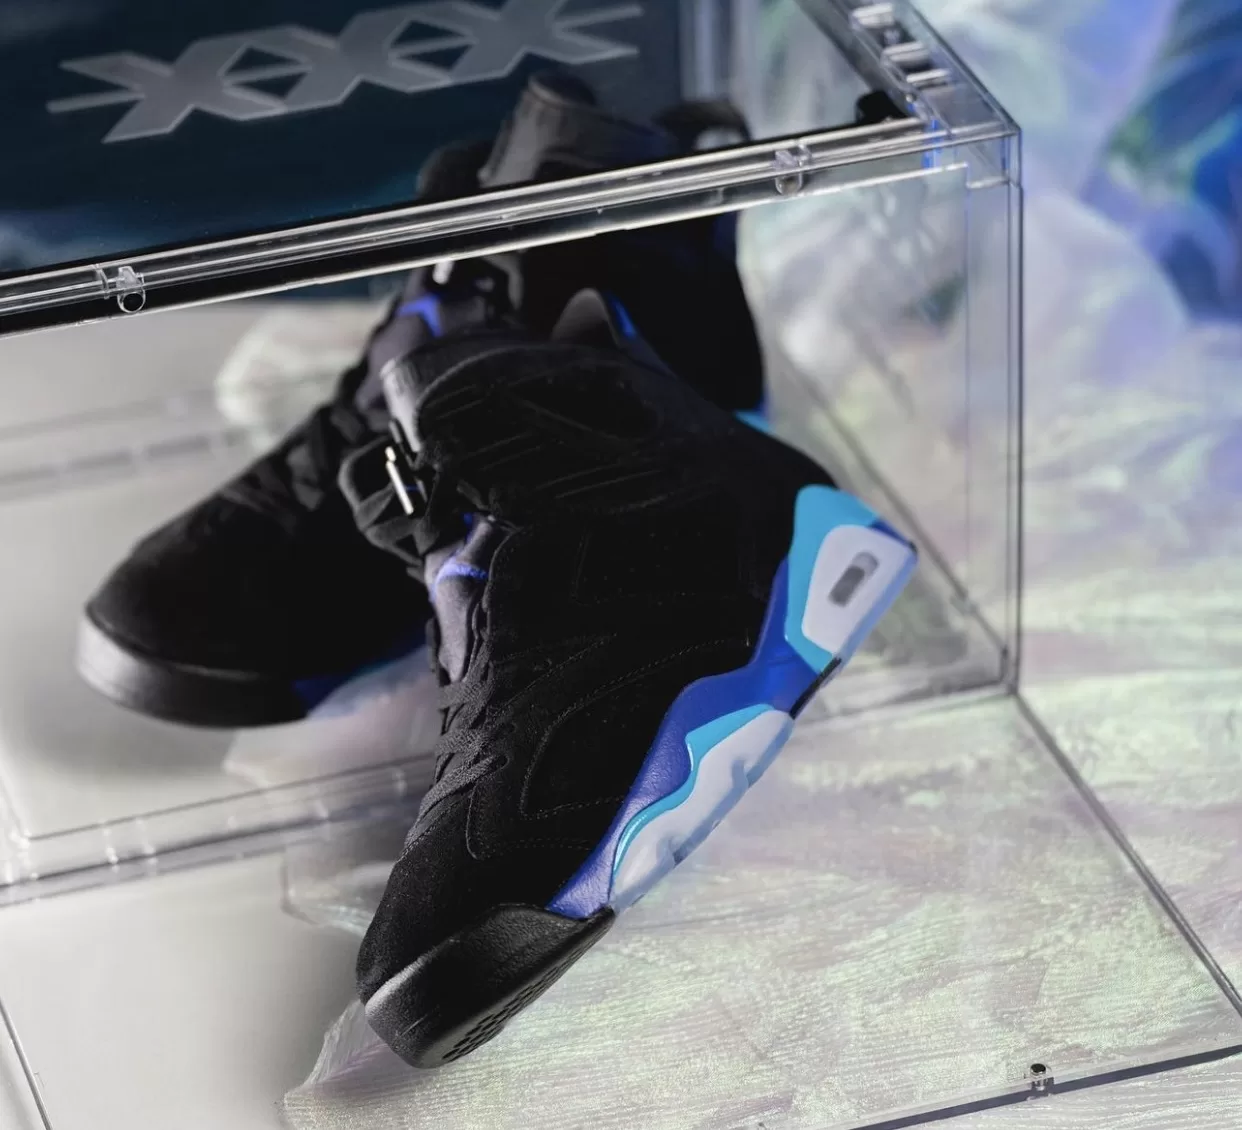 Image displaying the Air Jordan 6 "Aqua" sneakers in a Black, Bright Concord, and Aquatone color scheme, featuring a sleek design with a Black nubuck upper and contrasting accents, resting on an icy translucent outsole.